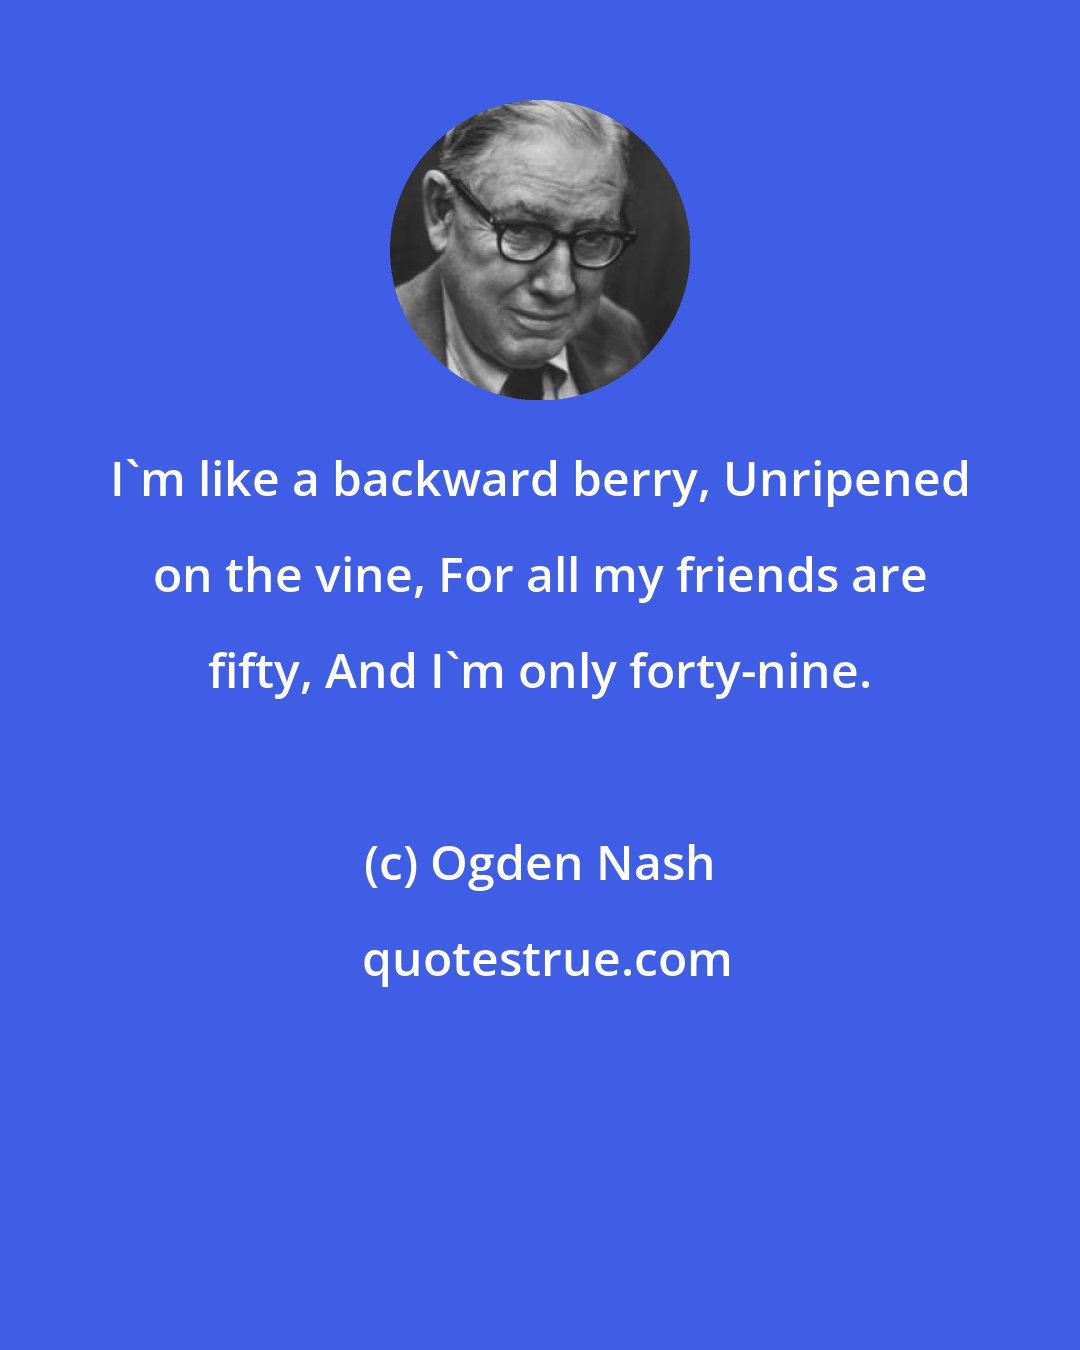 Ogden Nash: I'm like a backward berry, Unripened on the vine, For all my friends are fifty, And I'm only forty-nine.